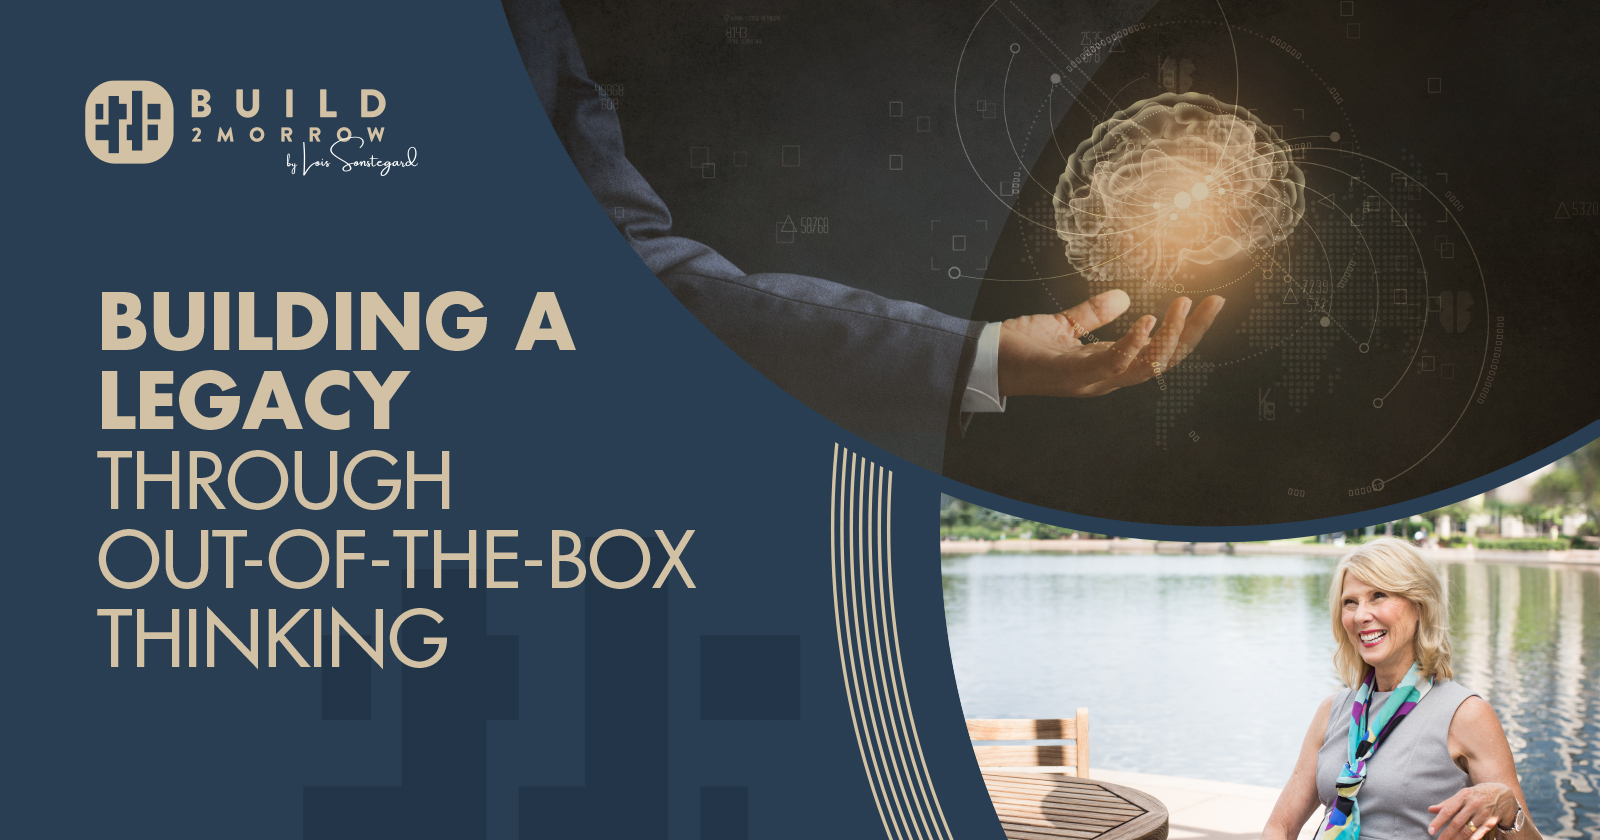 Building A Legacy Through Out-of-the-Box Thinking